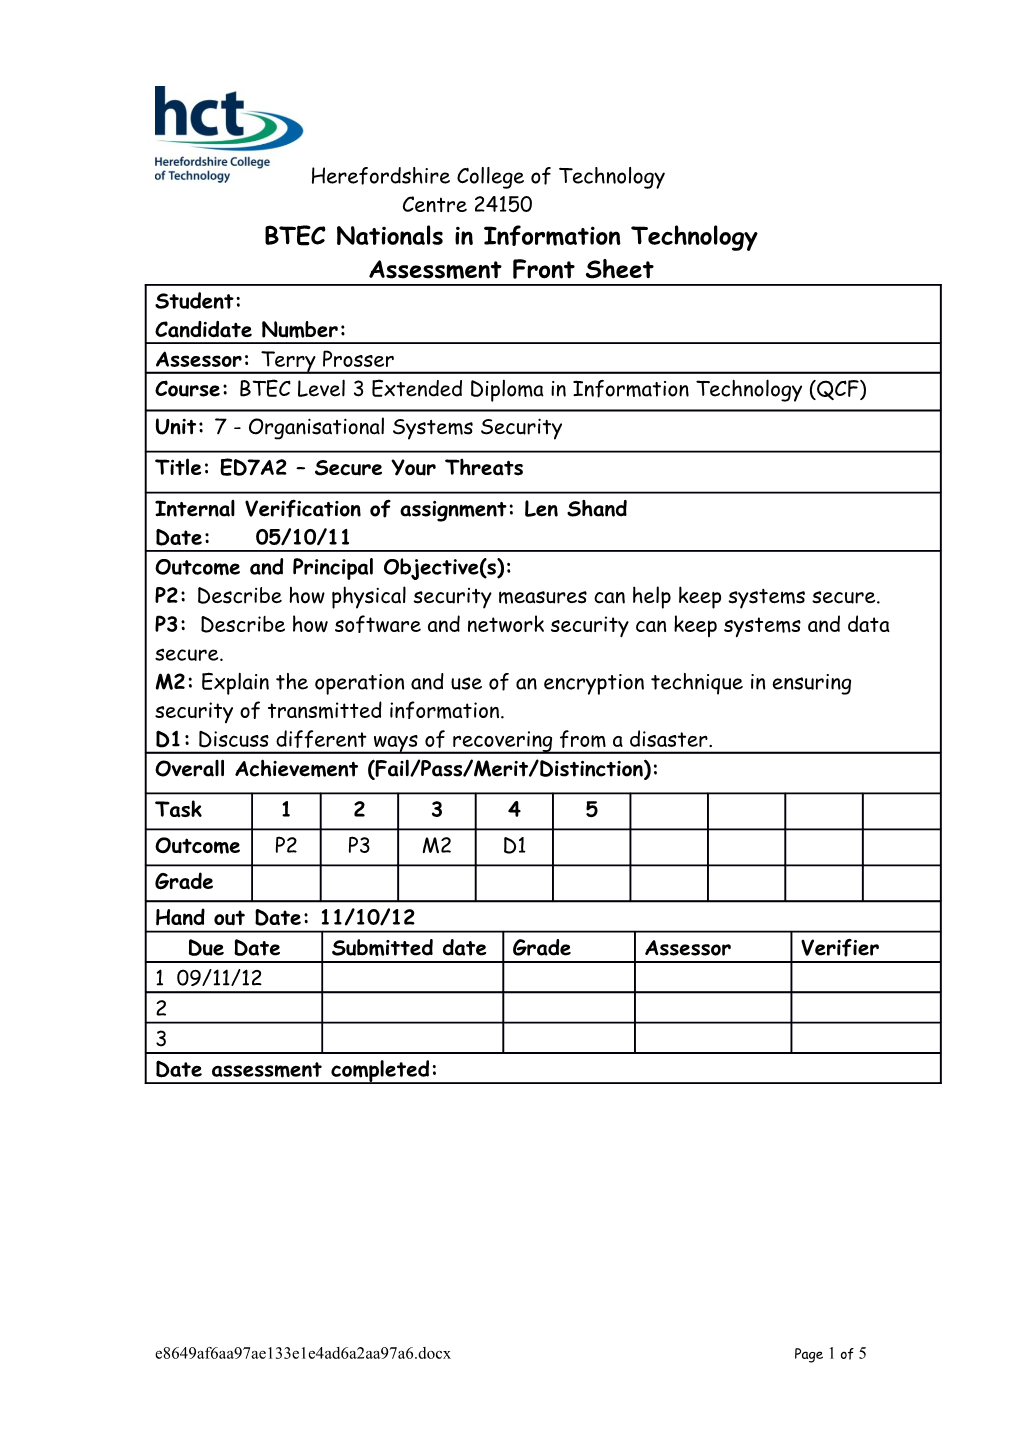 BTEC Nationals in Information Technology